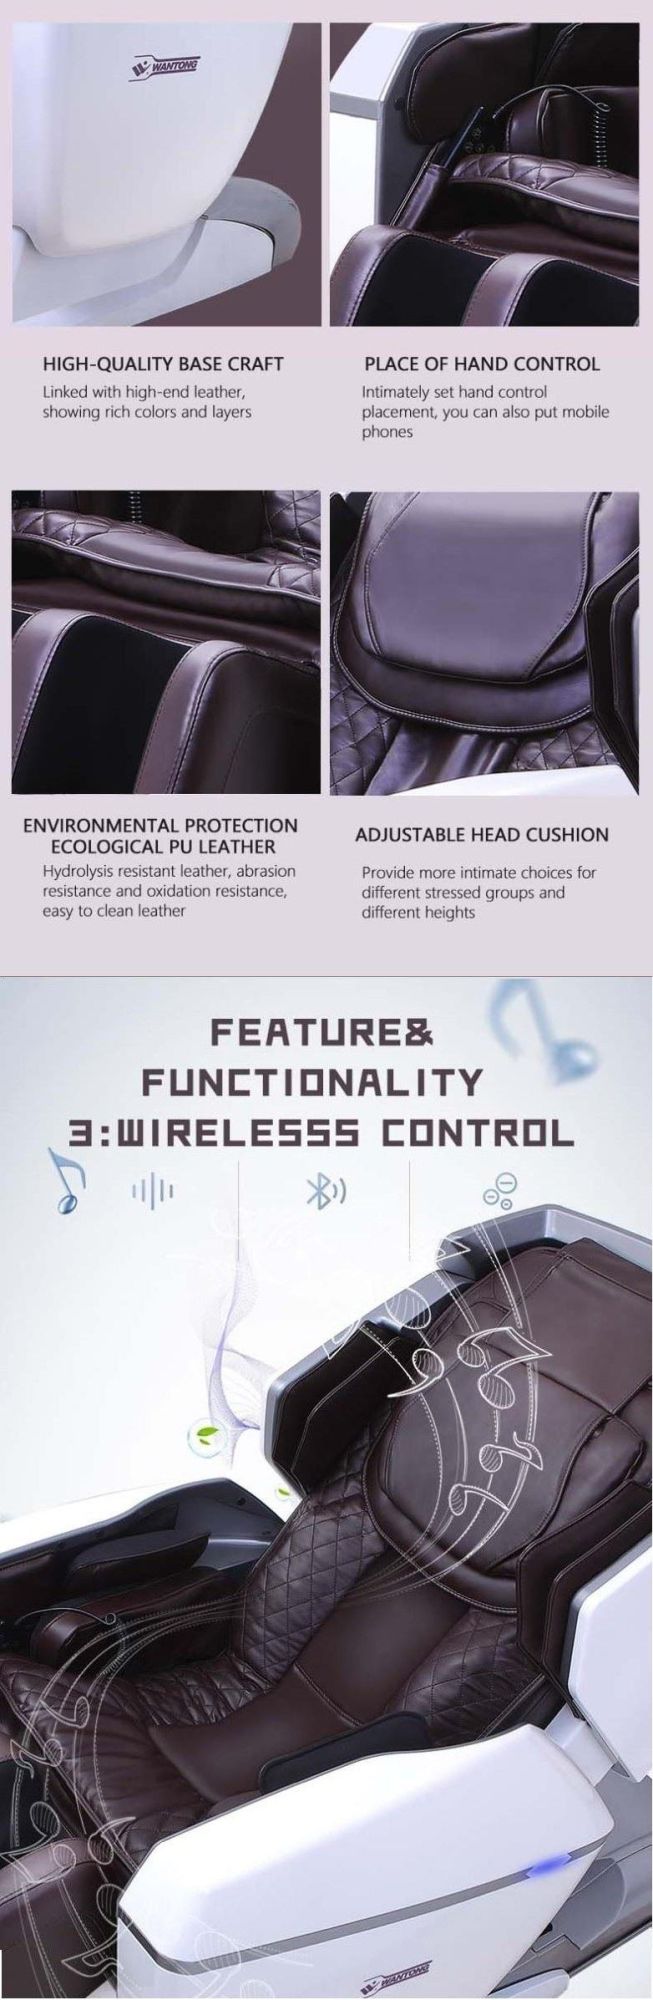 2021 Best Selling 4D Capsule Massage Chair OEM China Better Manufacturer